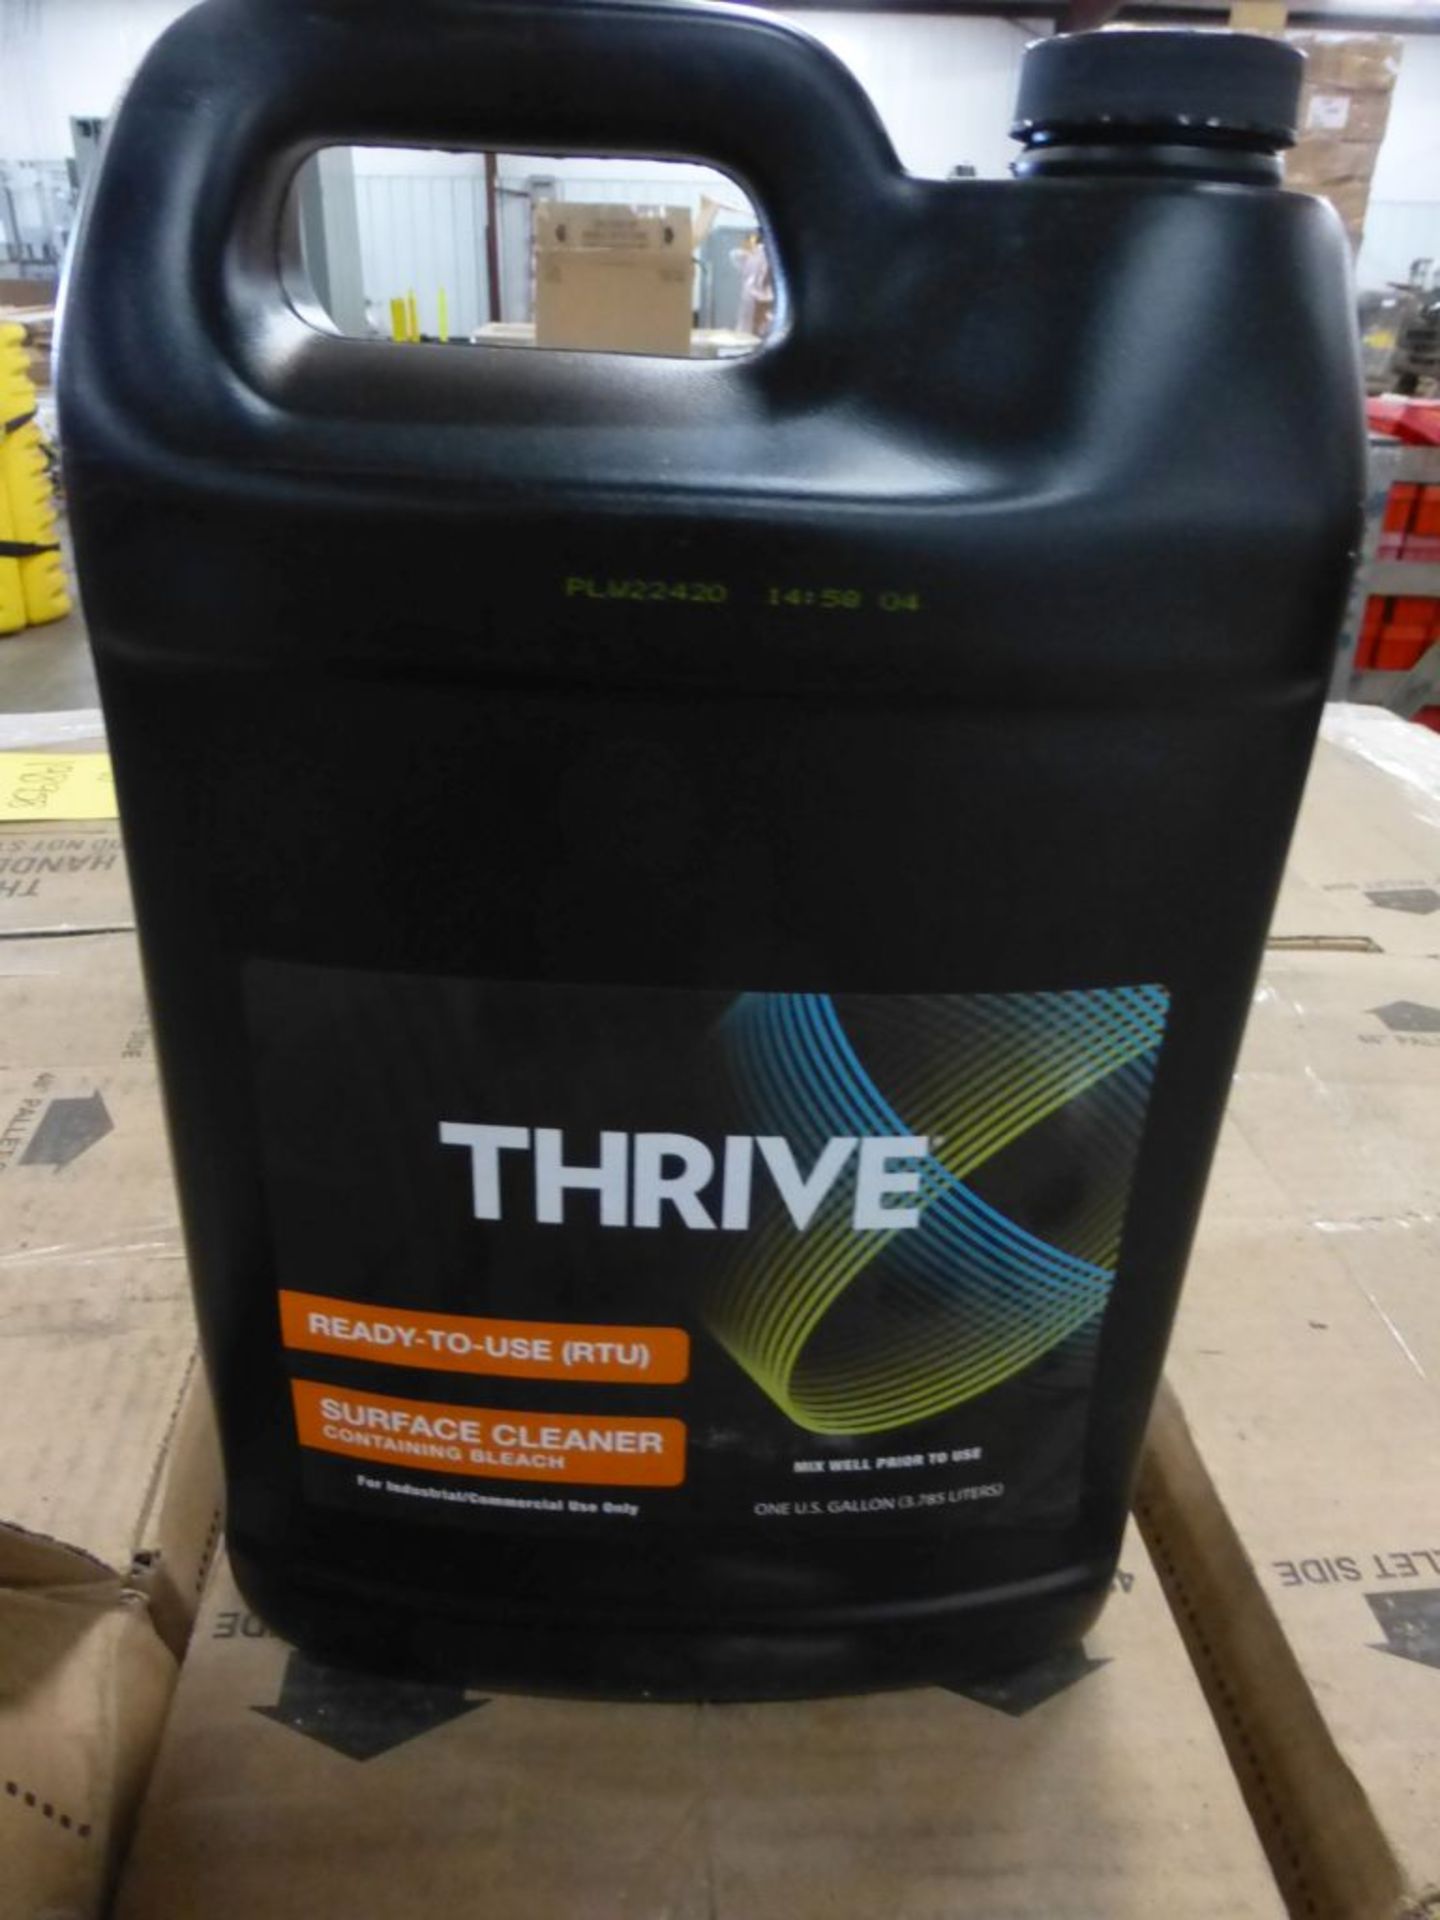 Lot of (42) 4-Gallon Cases of Thrive RTU Surface Cleaner w/Bleach